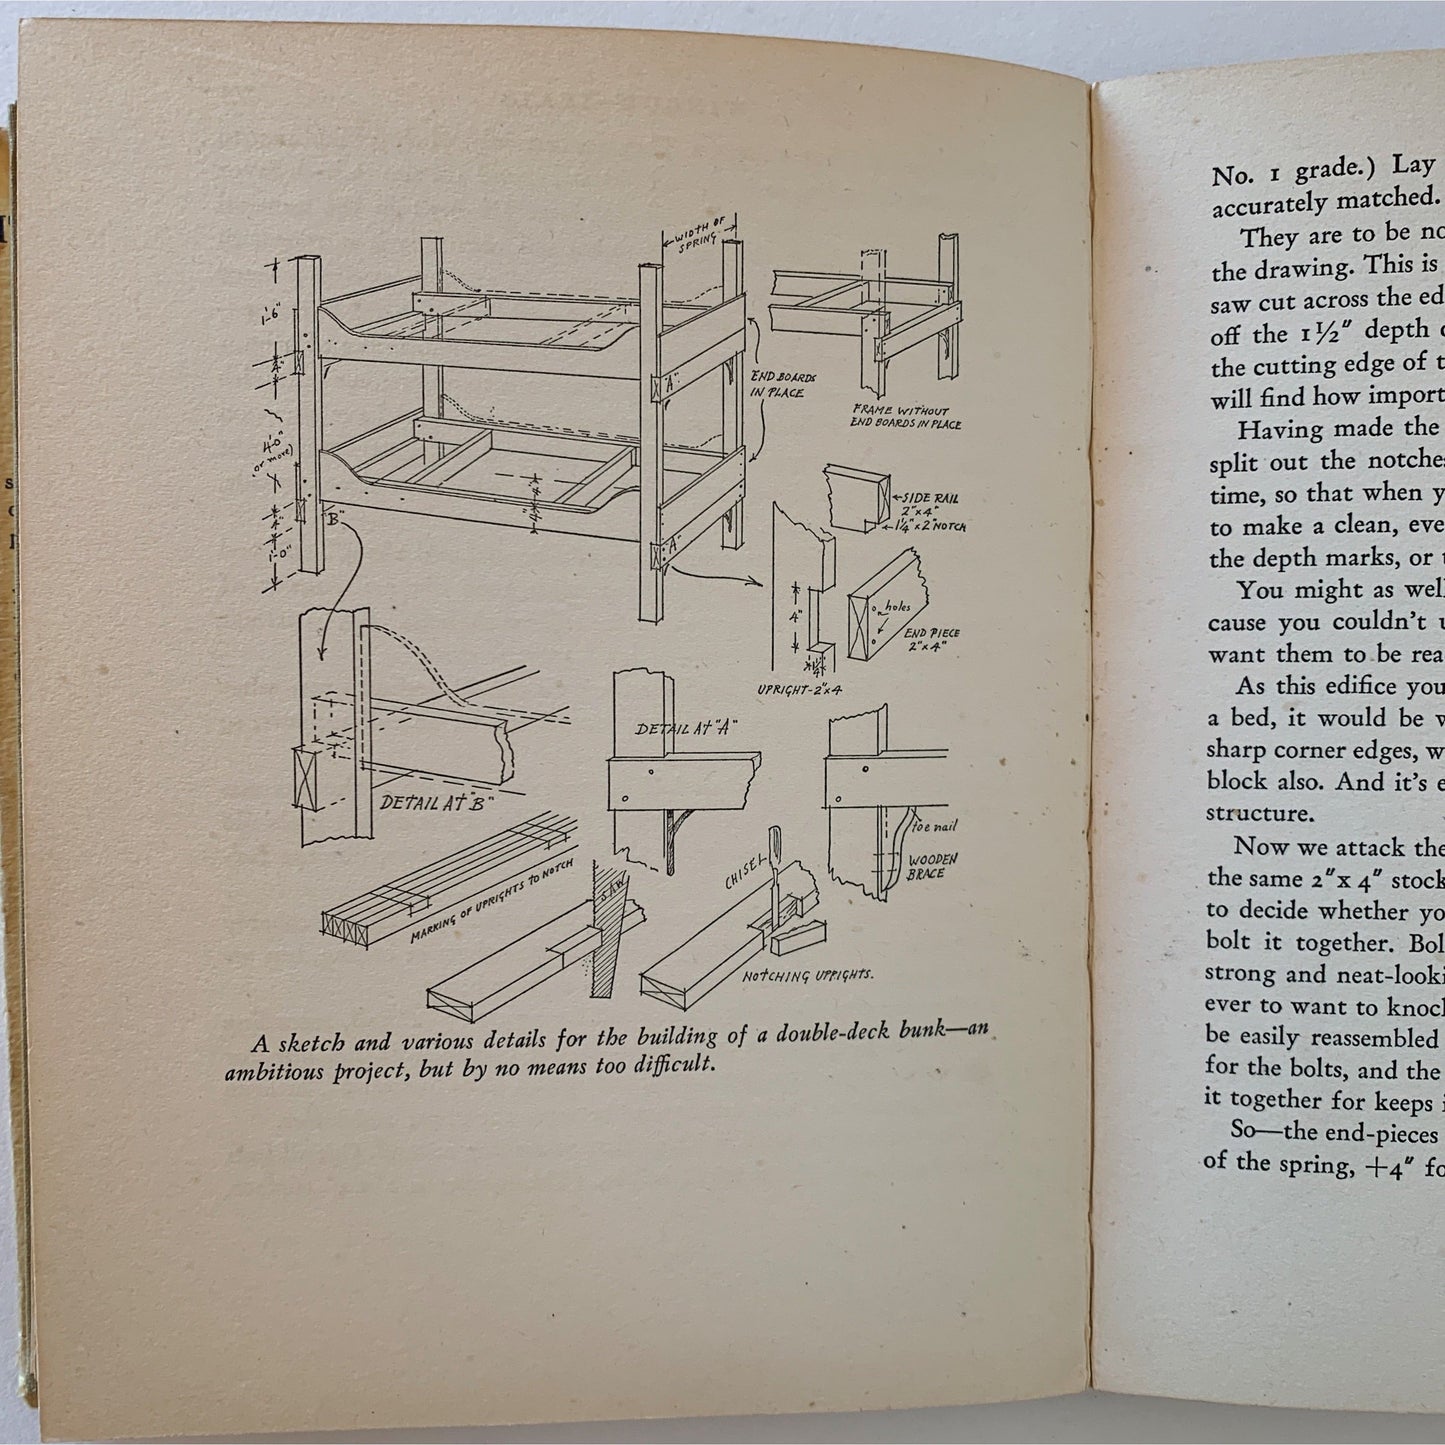 It's Fun to Build Things, Vintage 1942 DIY Home Improvement Book